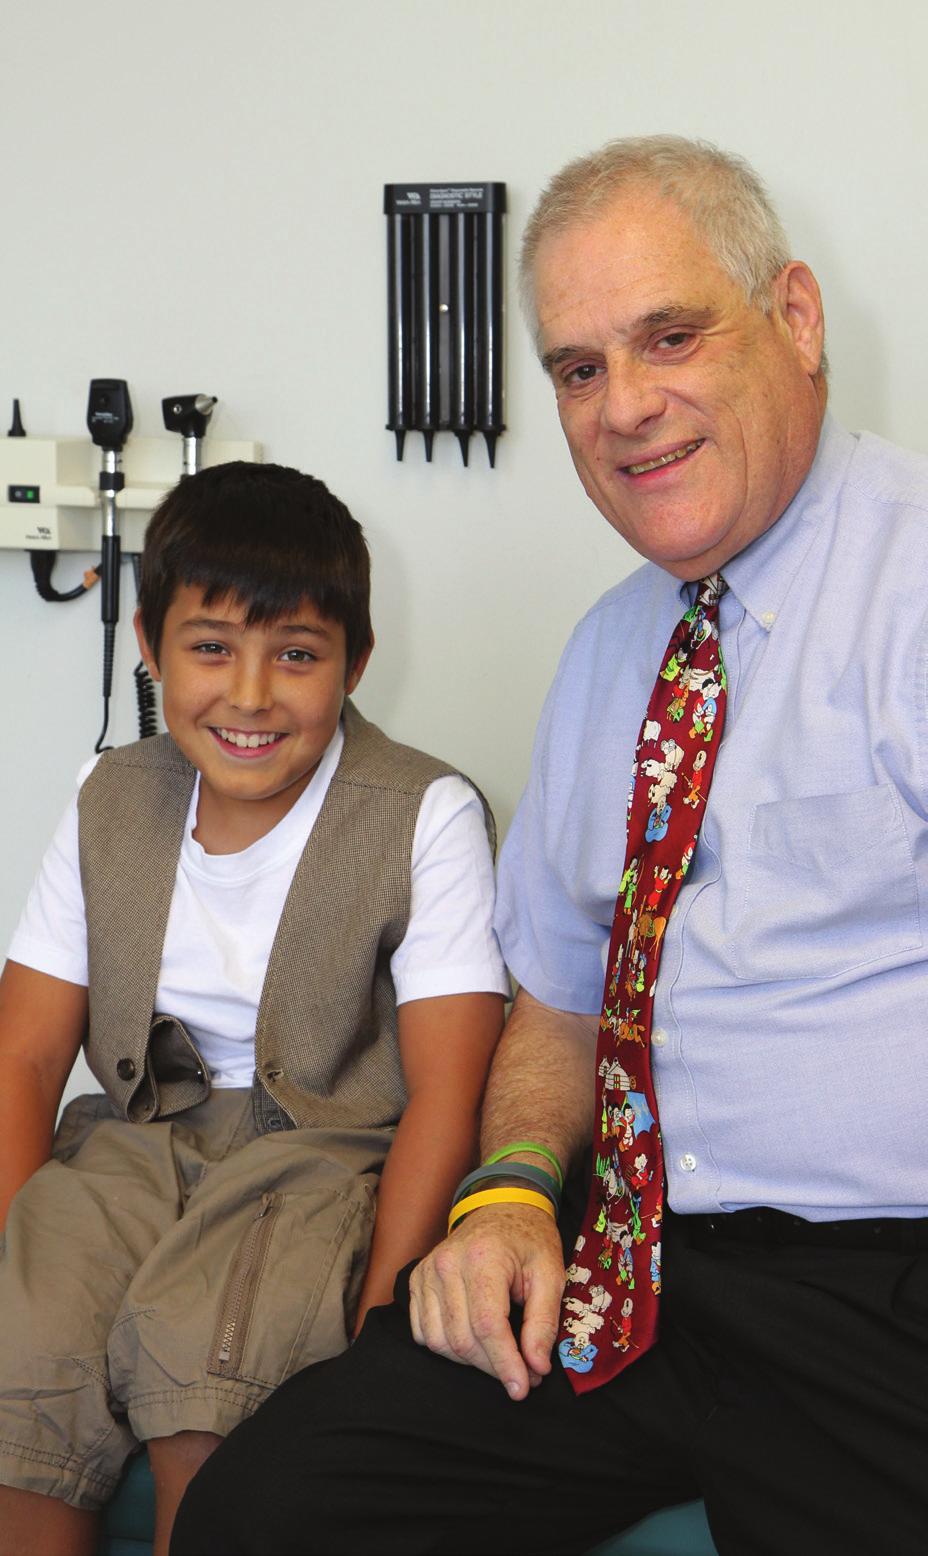 comprehensive care for children with short stature, thyroid issues, puberty disorders, adrenal disorders and more.